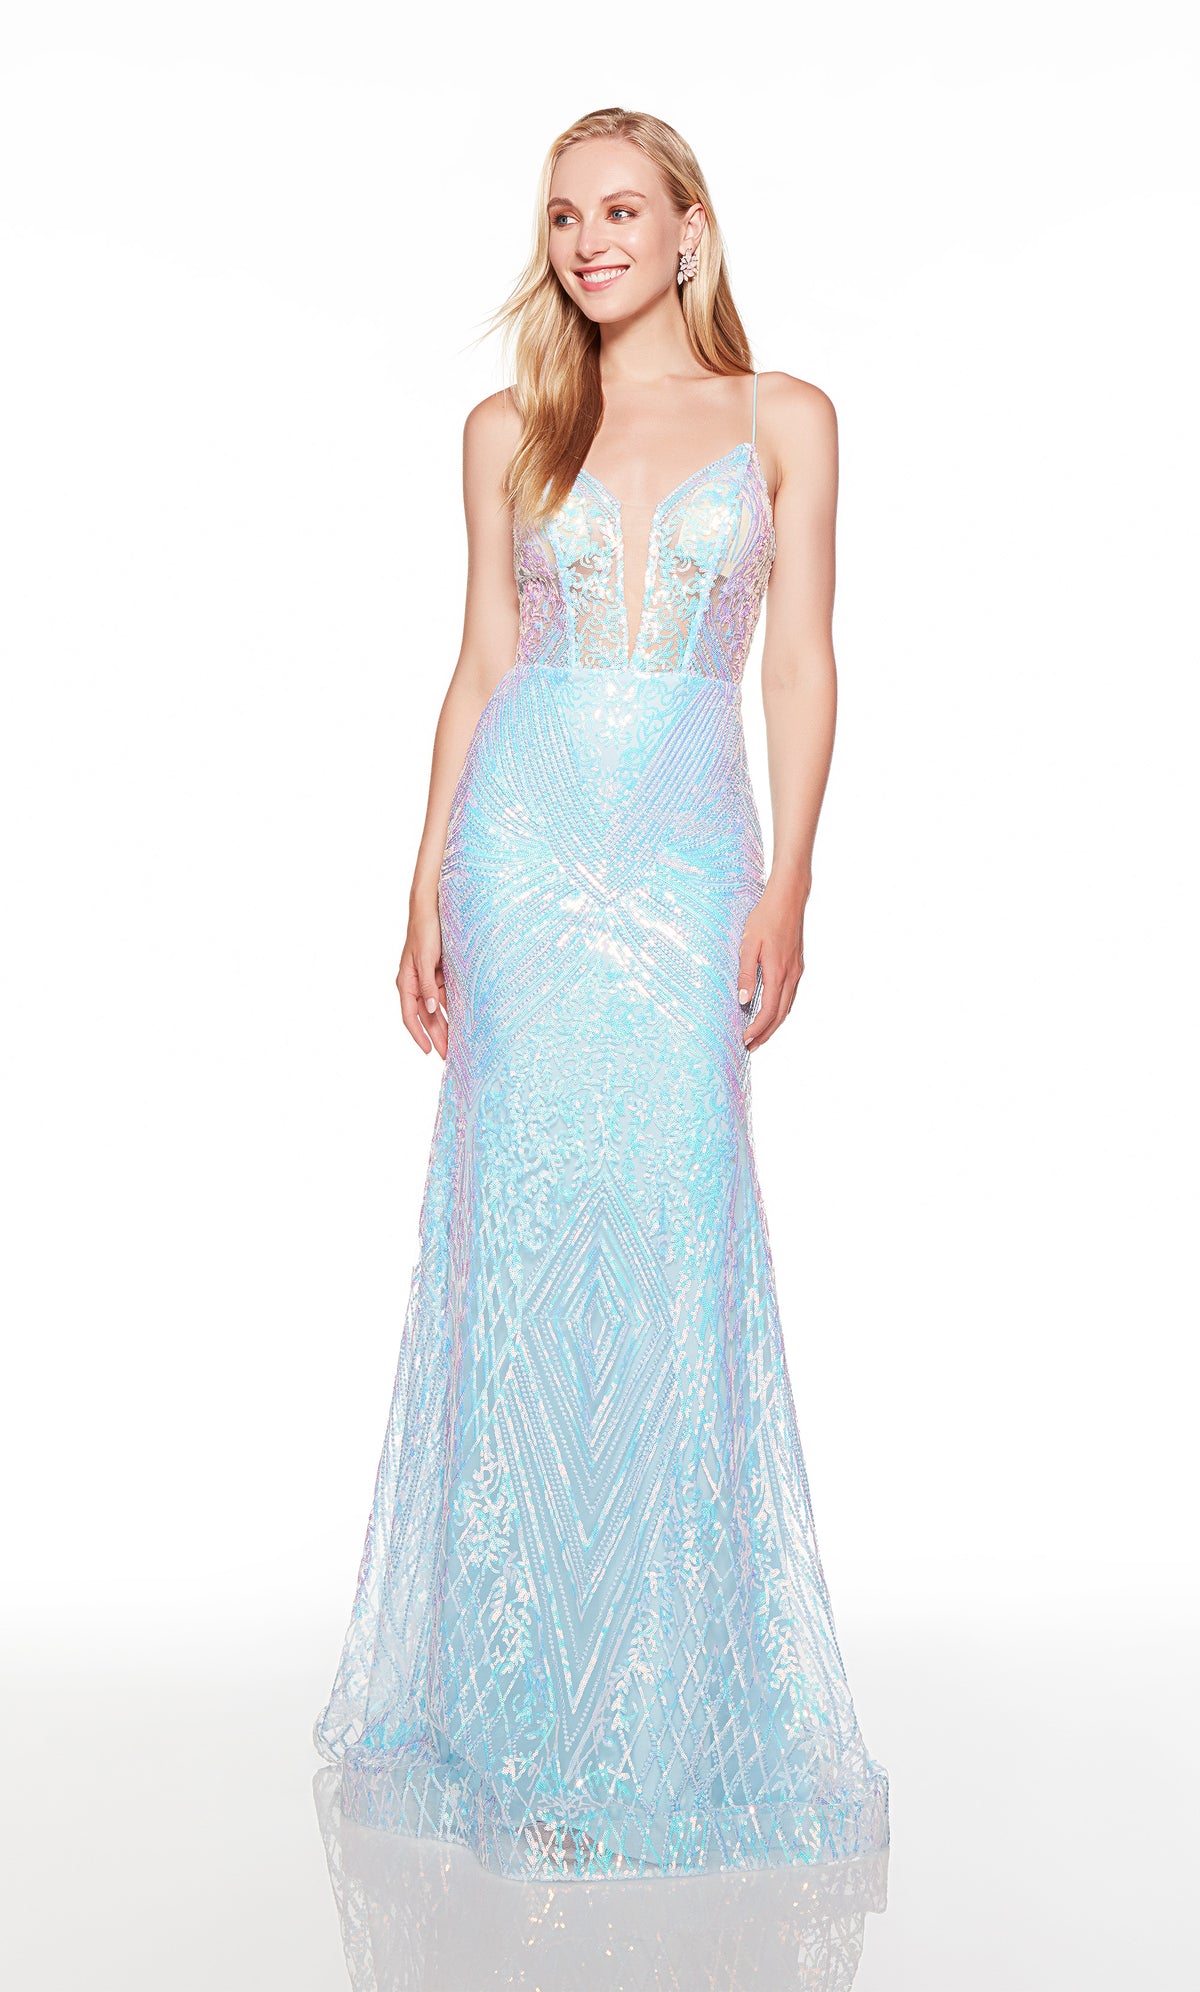 Fit and flare corset dress with a sheer lace bodice in iridescent sequins.